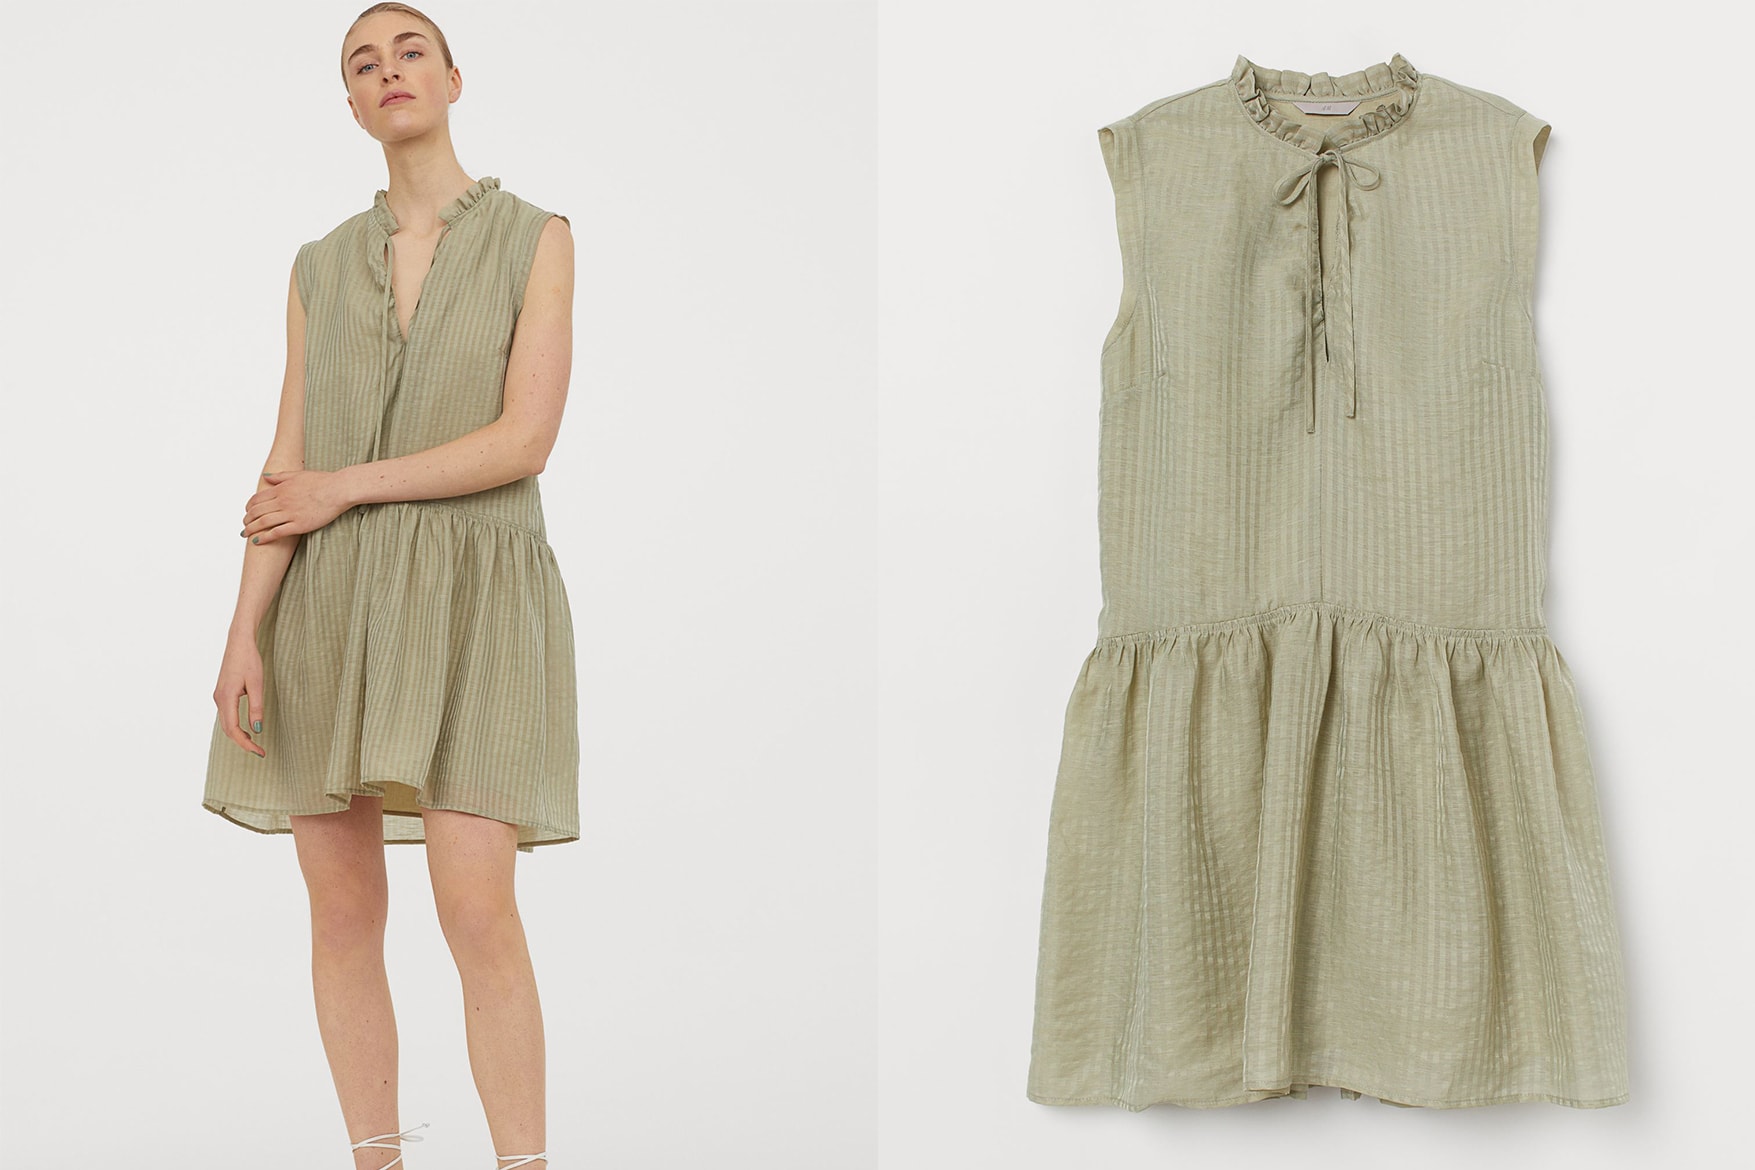 H&M New Arrivals Look Wonderfully Expensive summer